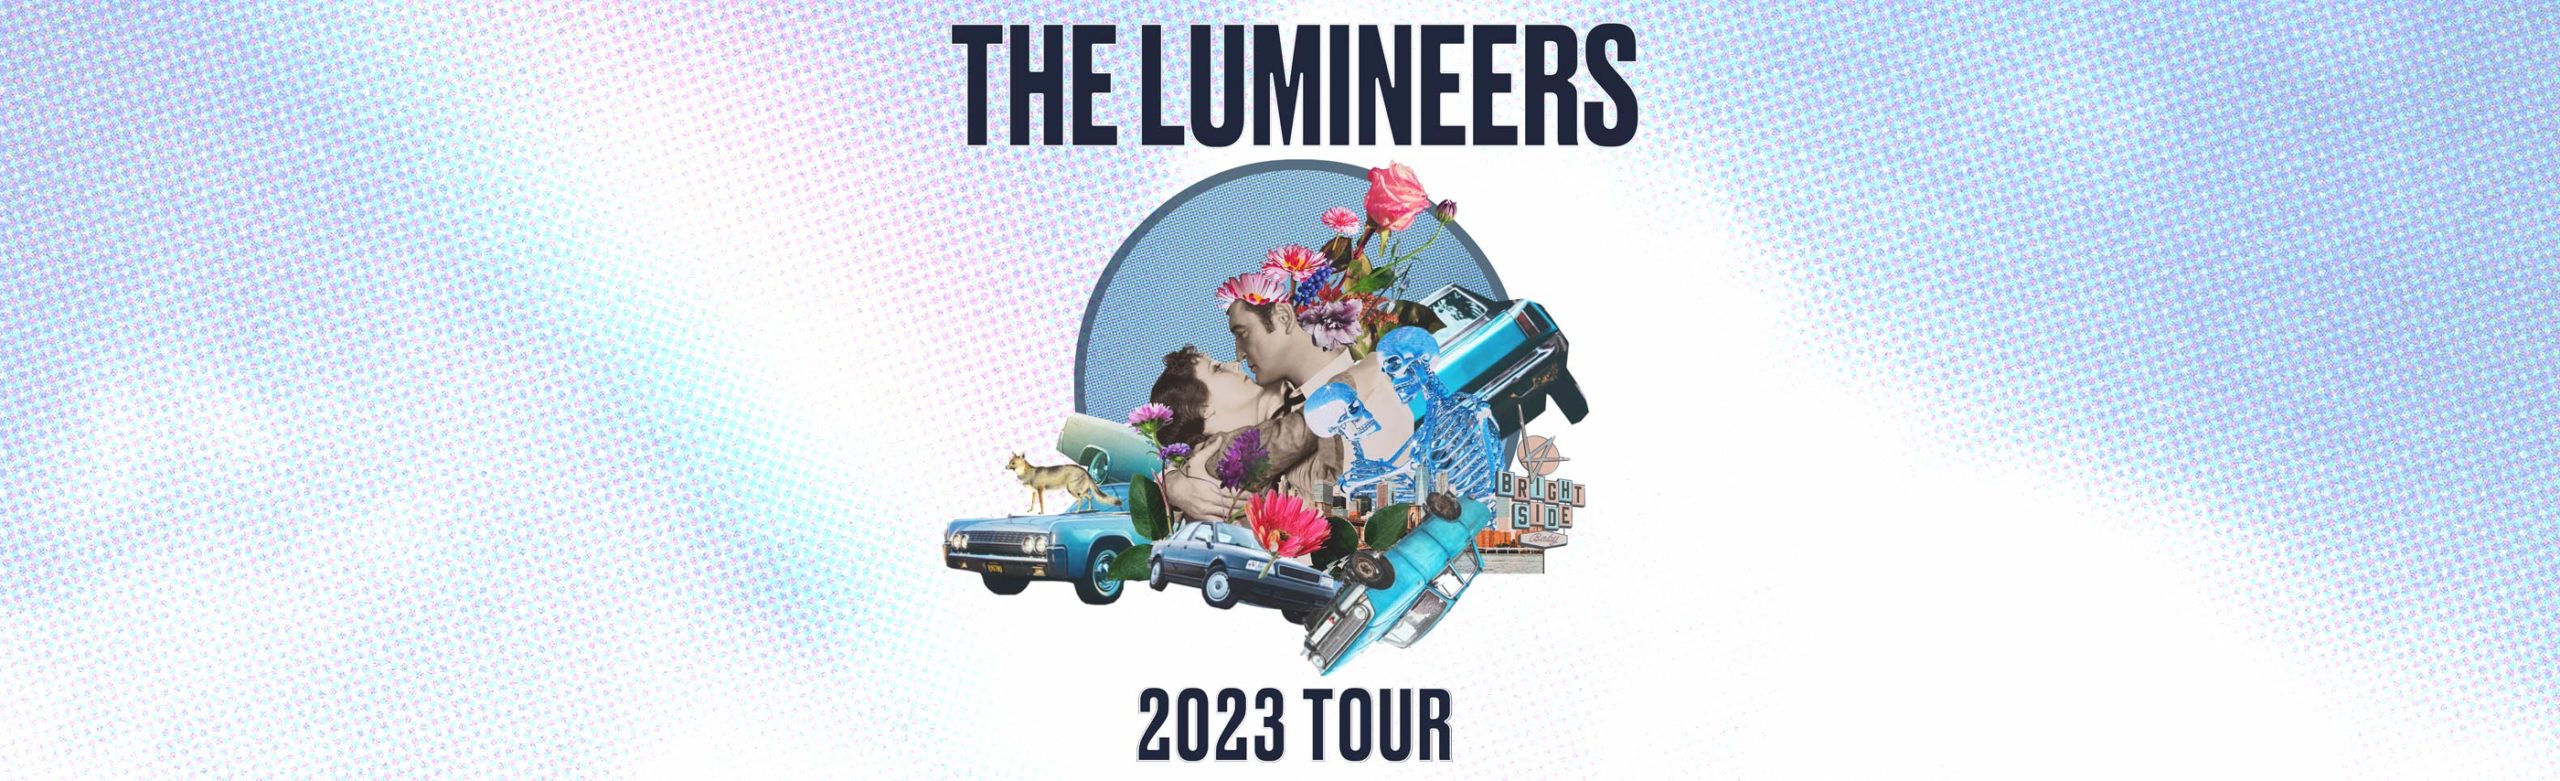 The Lumineers Confirm Two Nights at KettleHouse Amphitheater with James Bay Image